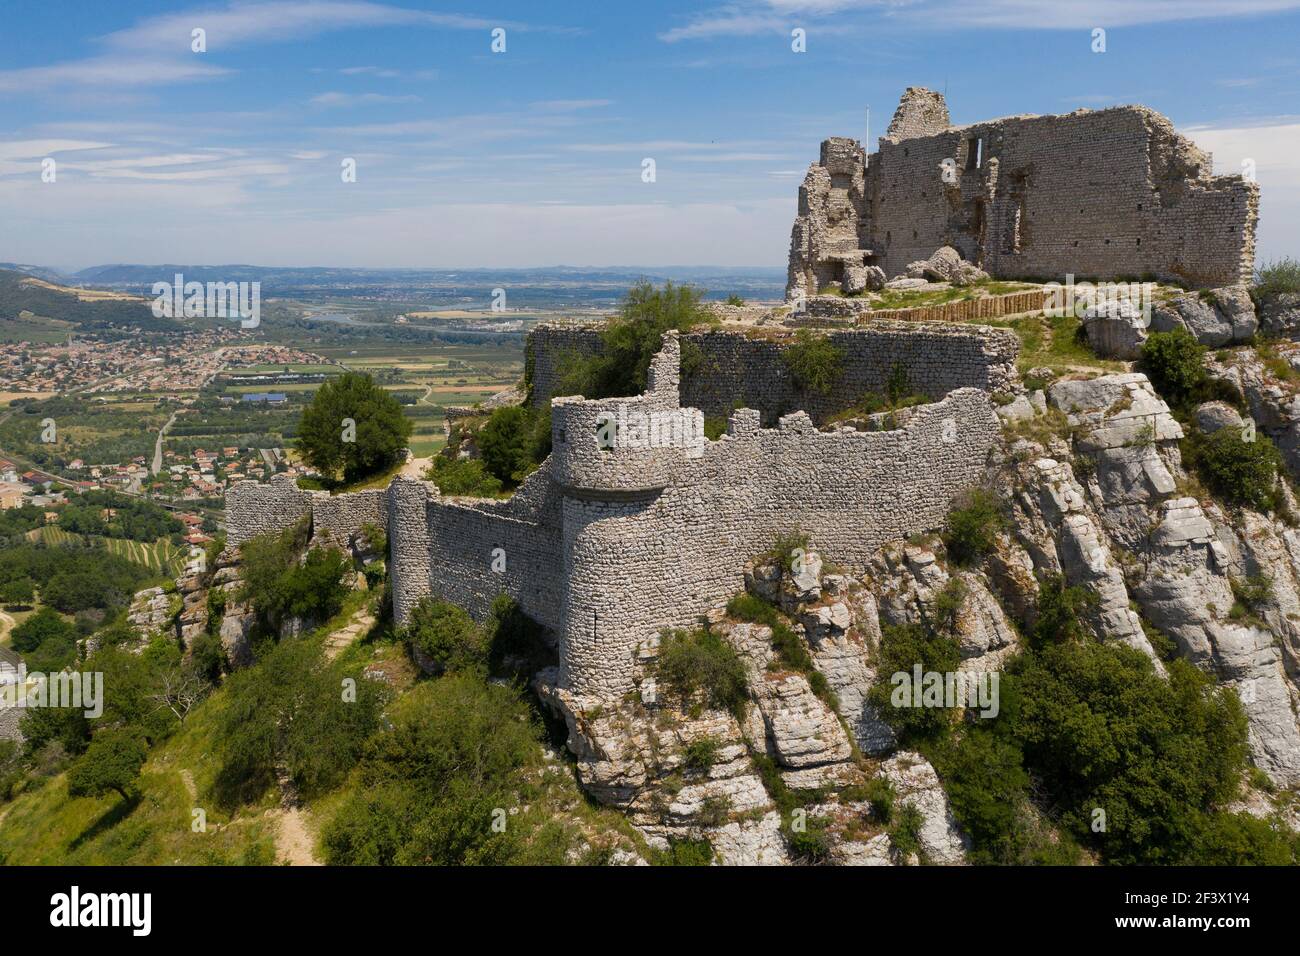 Saint-Peray (south-eastern France): ruins of the Chateau de Crussol, medieval fortress dating back to the 12th century registered as a National Histor Stock Photo